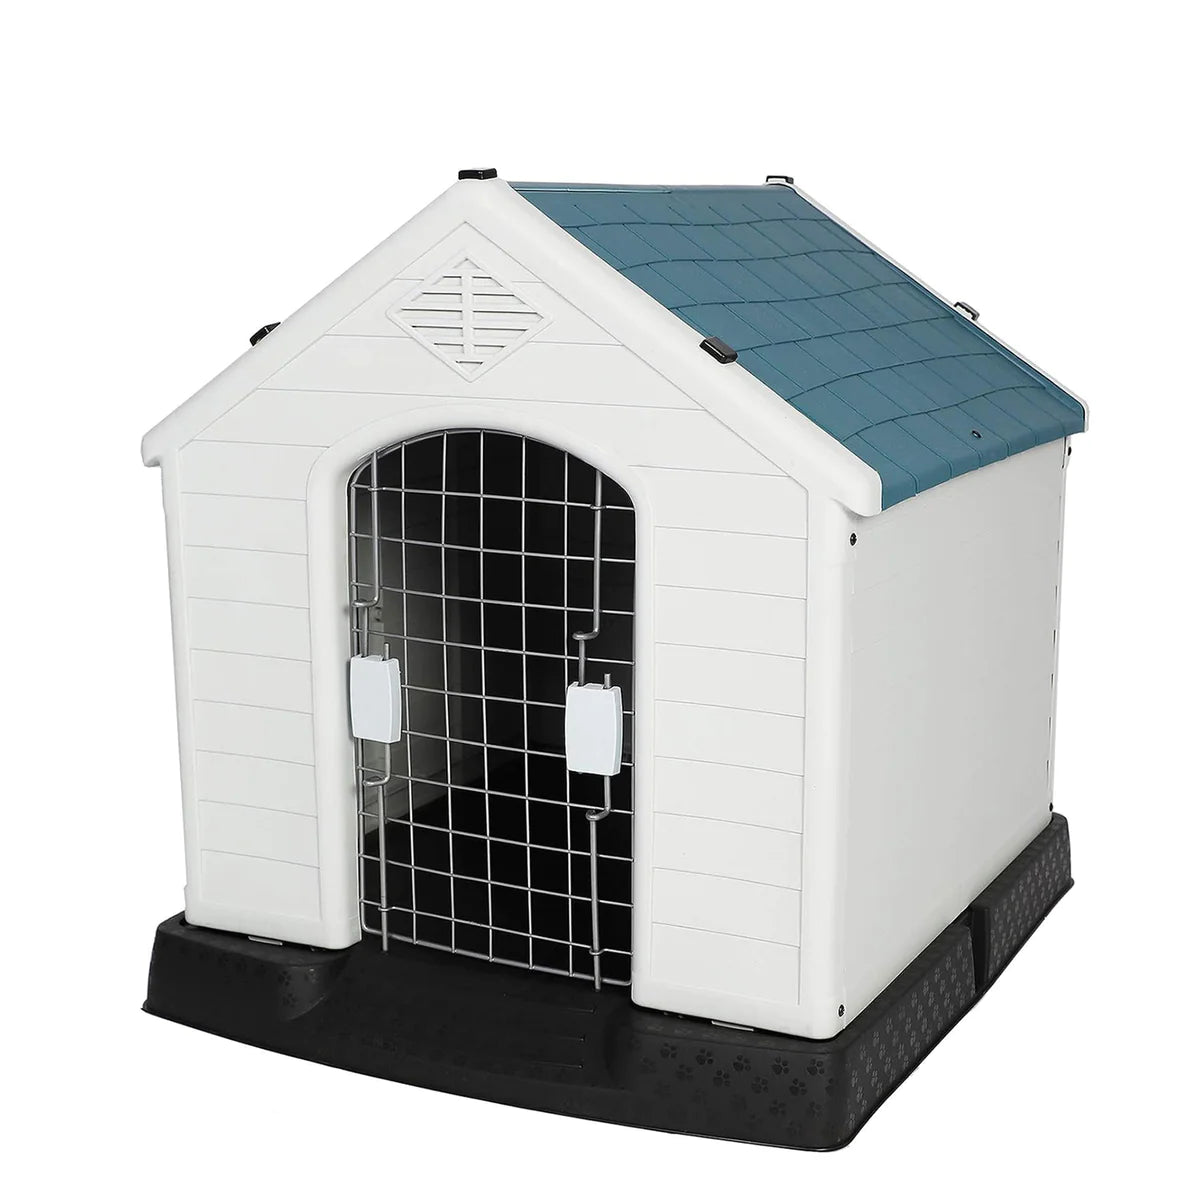 Outdoor Dog Houses Multiple Size Plastic Kennel with Mesh Iron Door, Blue and White